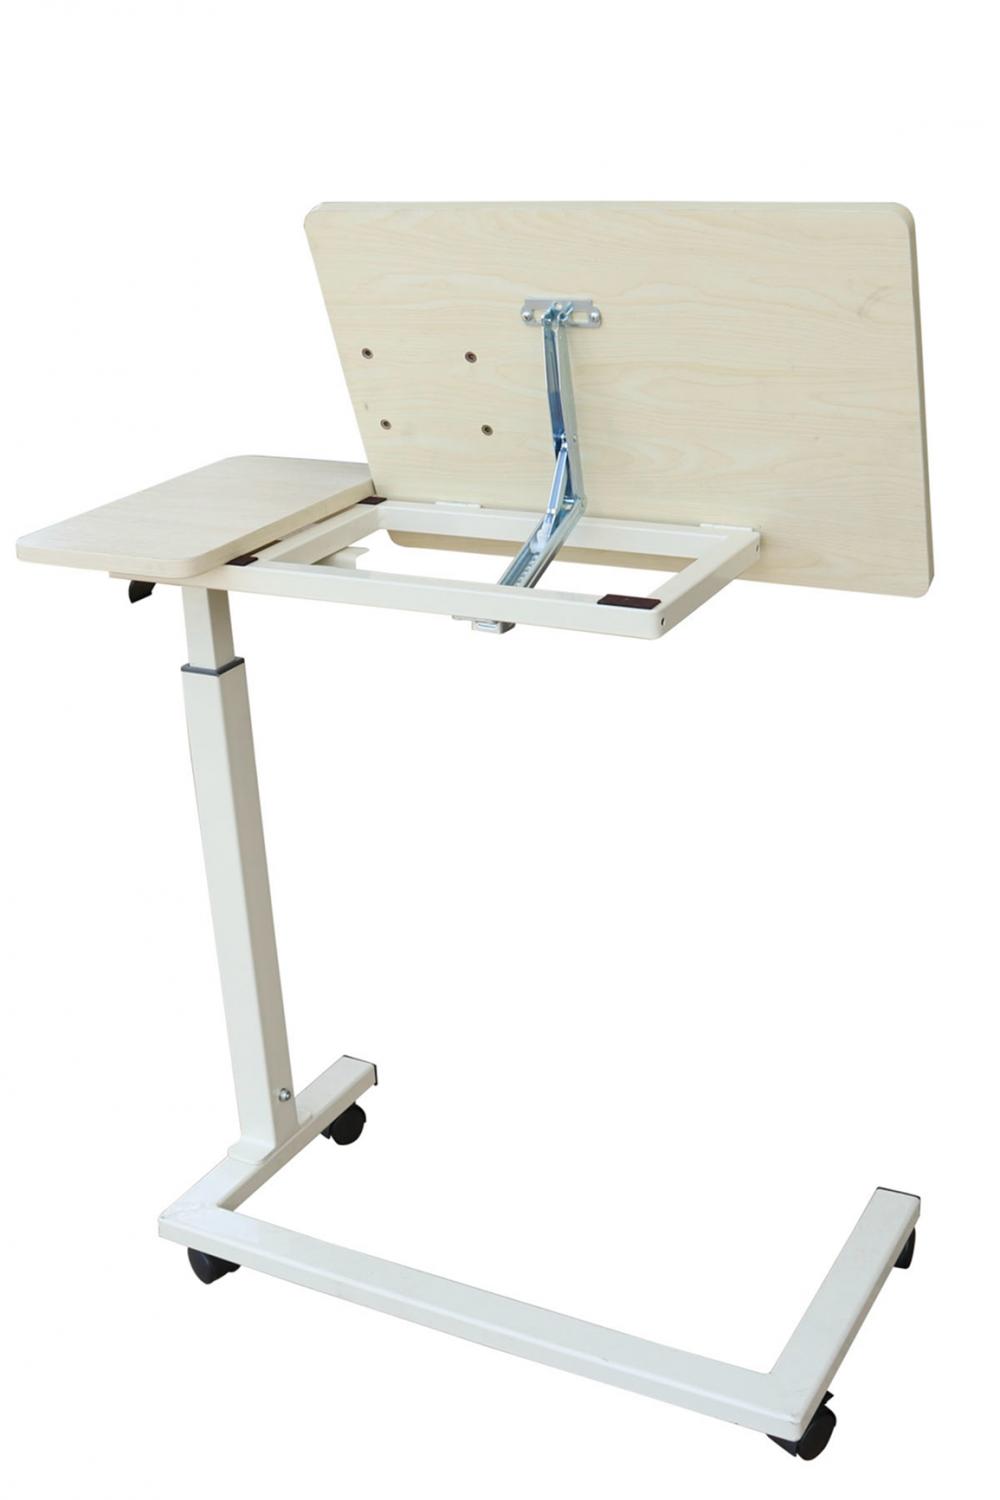 Medical over bed table with fixed brake